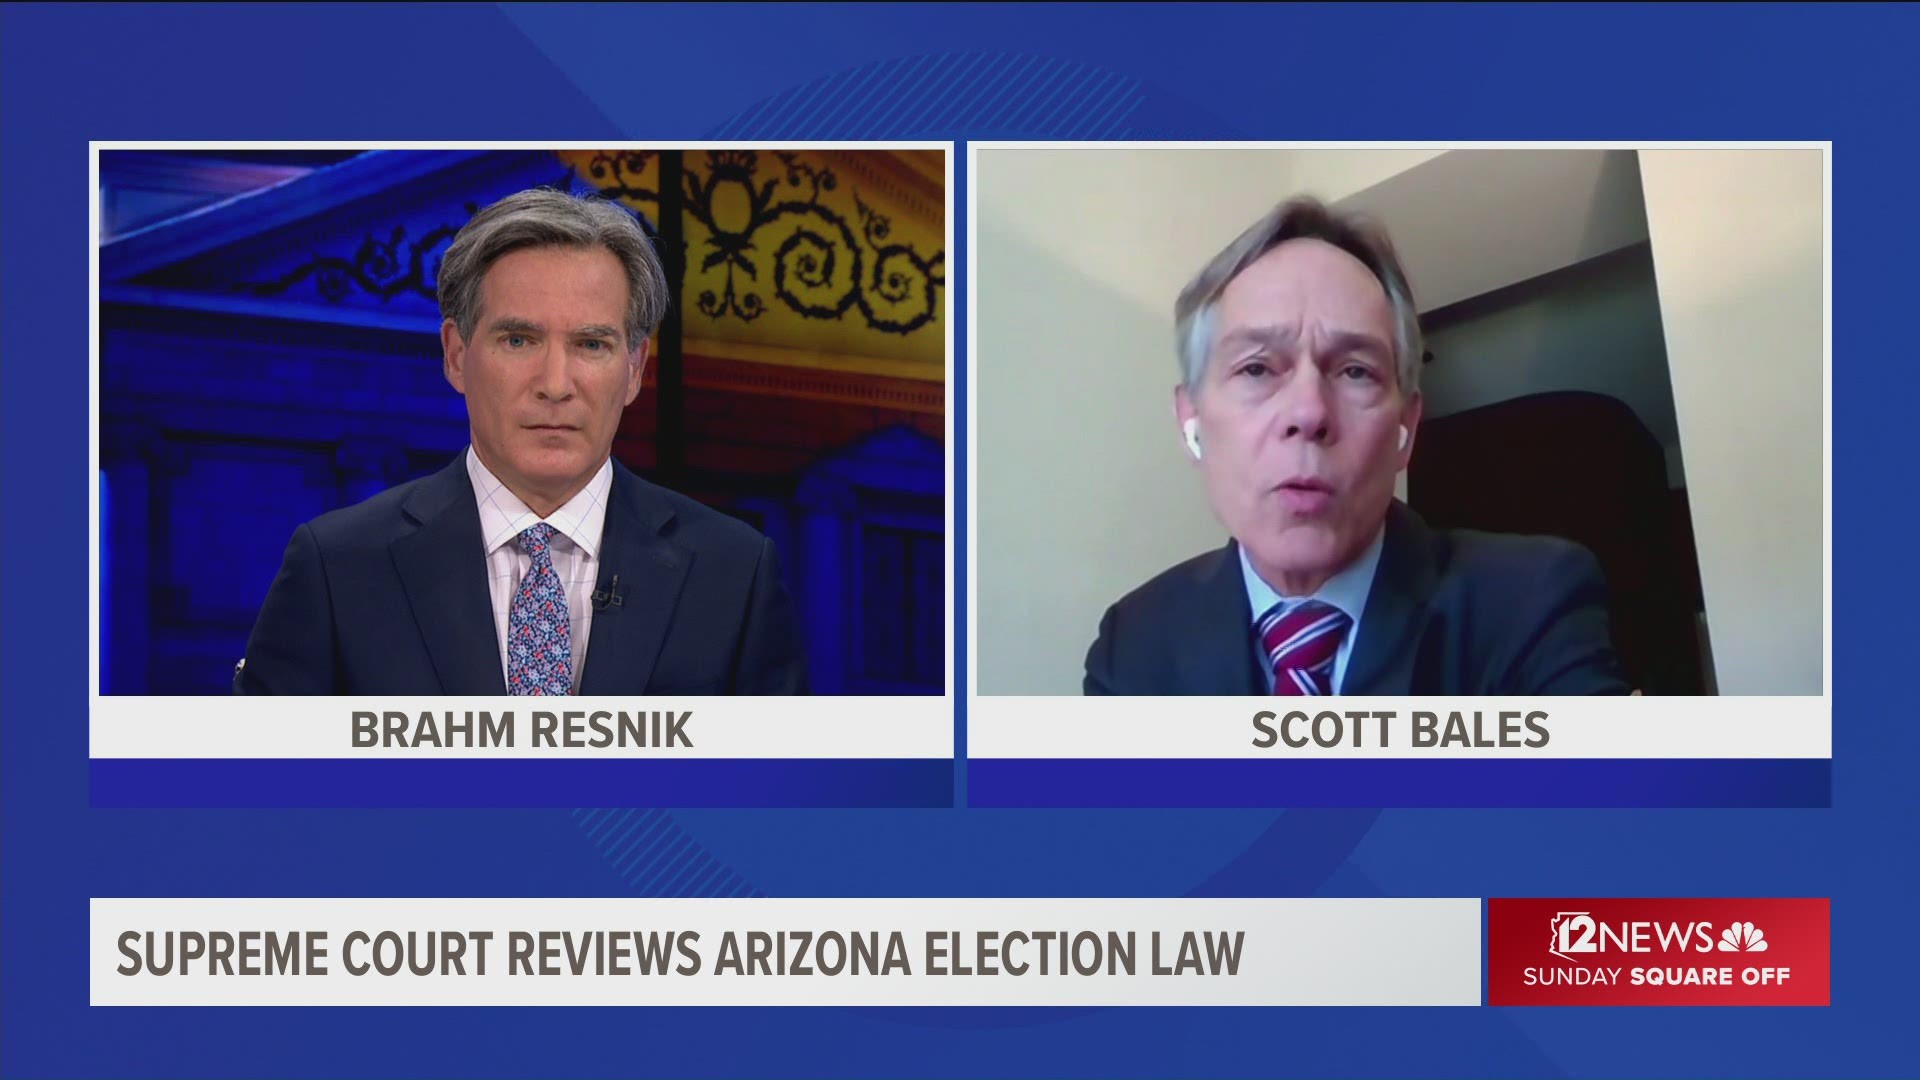 A retired chief justice of the Arizona Supreme Court says voter protections nationwide are at stake when an Arizona election law goes before the U.S. Supreme Court.